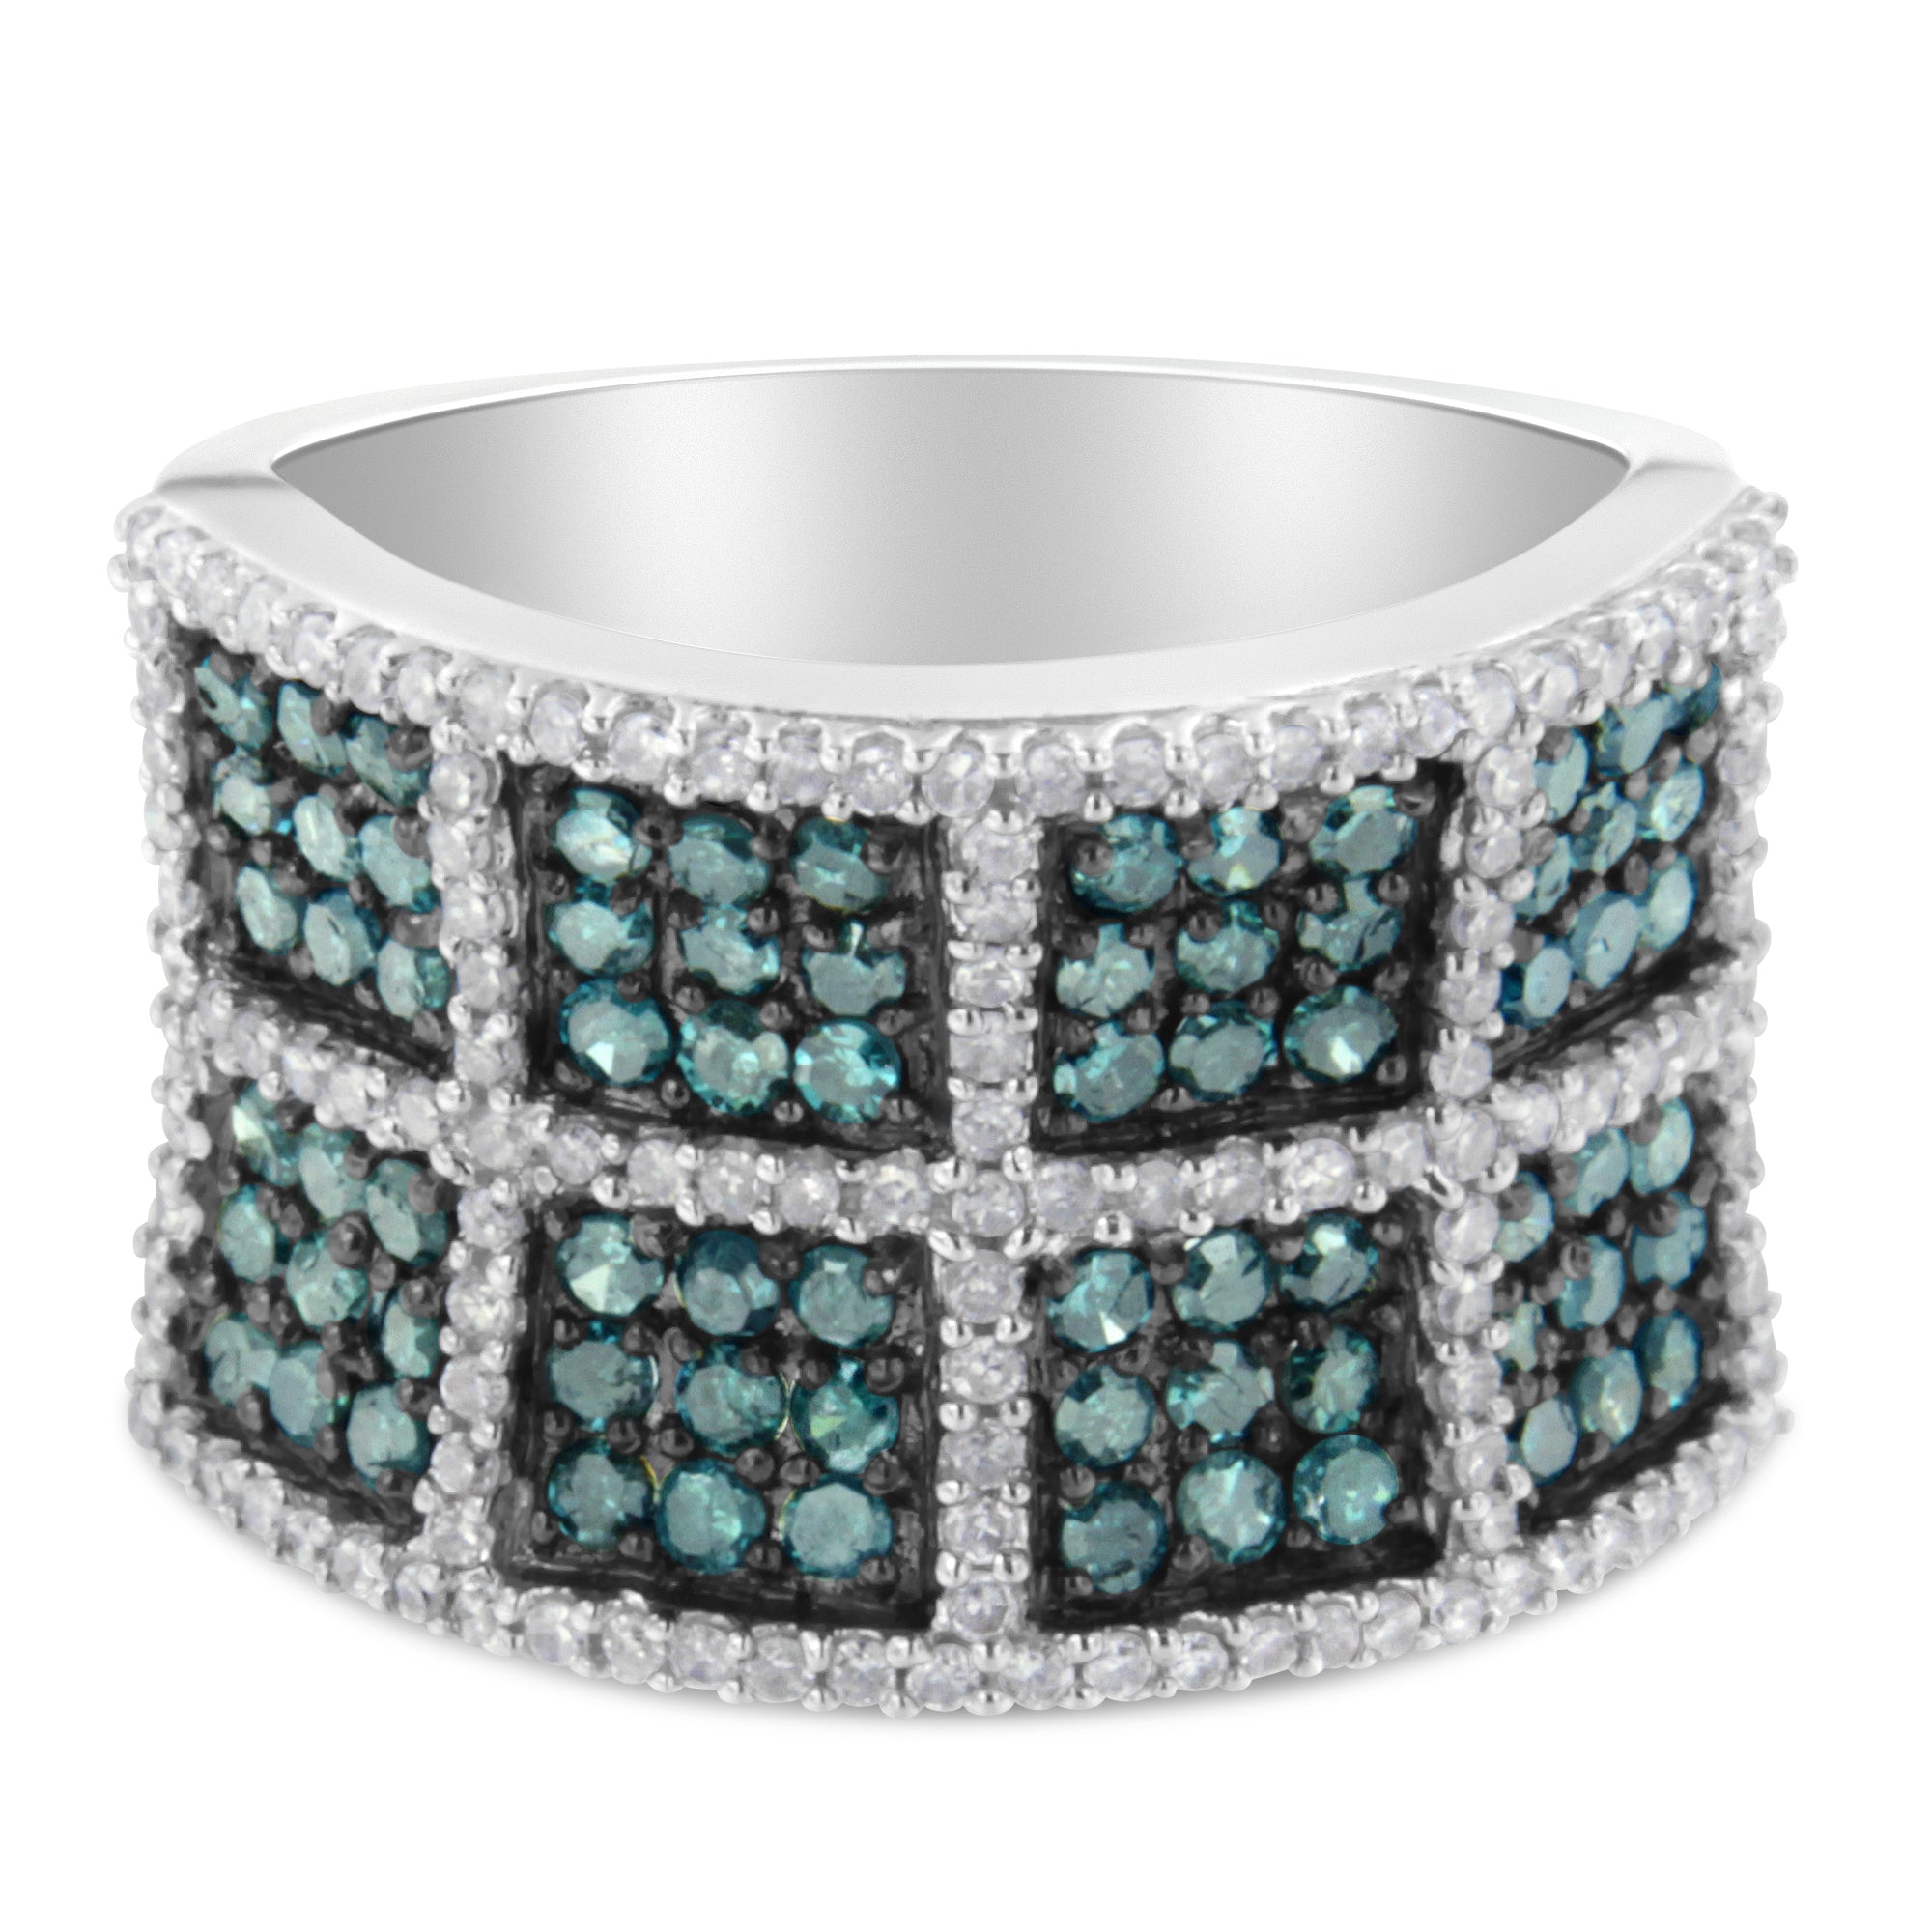 14K White Gold White and Blue Diamond Cocktail Ring - Size 6